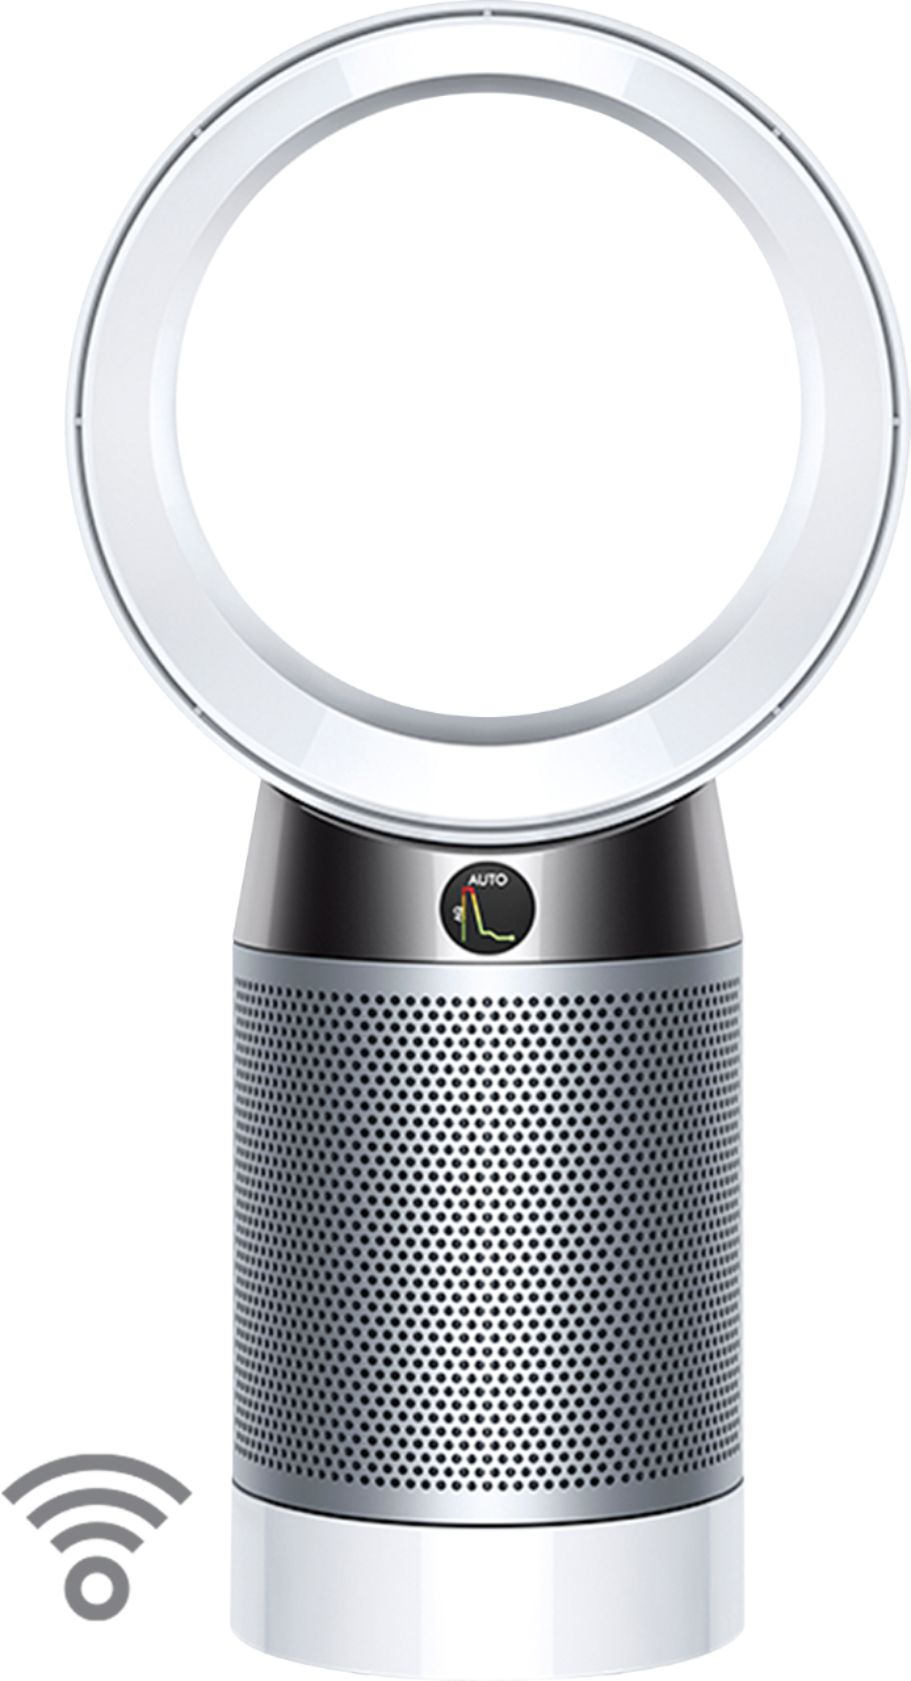 Dyson DP04 Pure Cool Air Purifier White/Silver 310150-01 - Best Buy